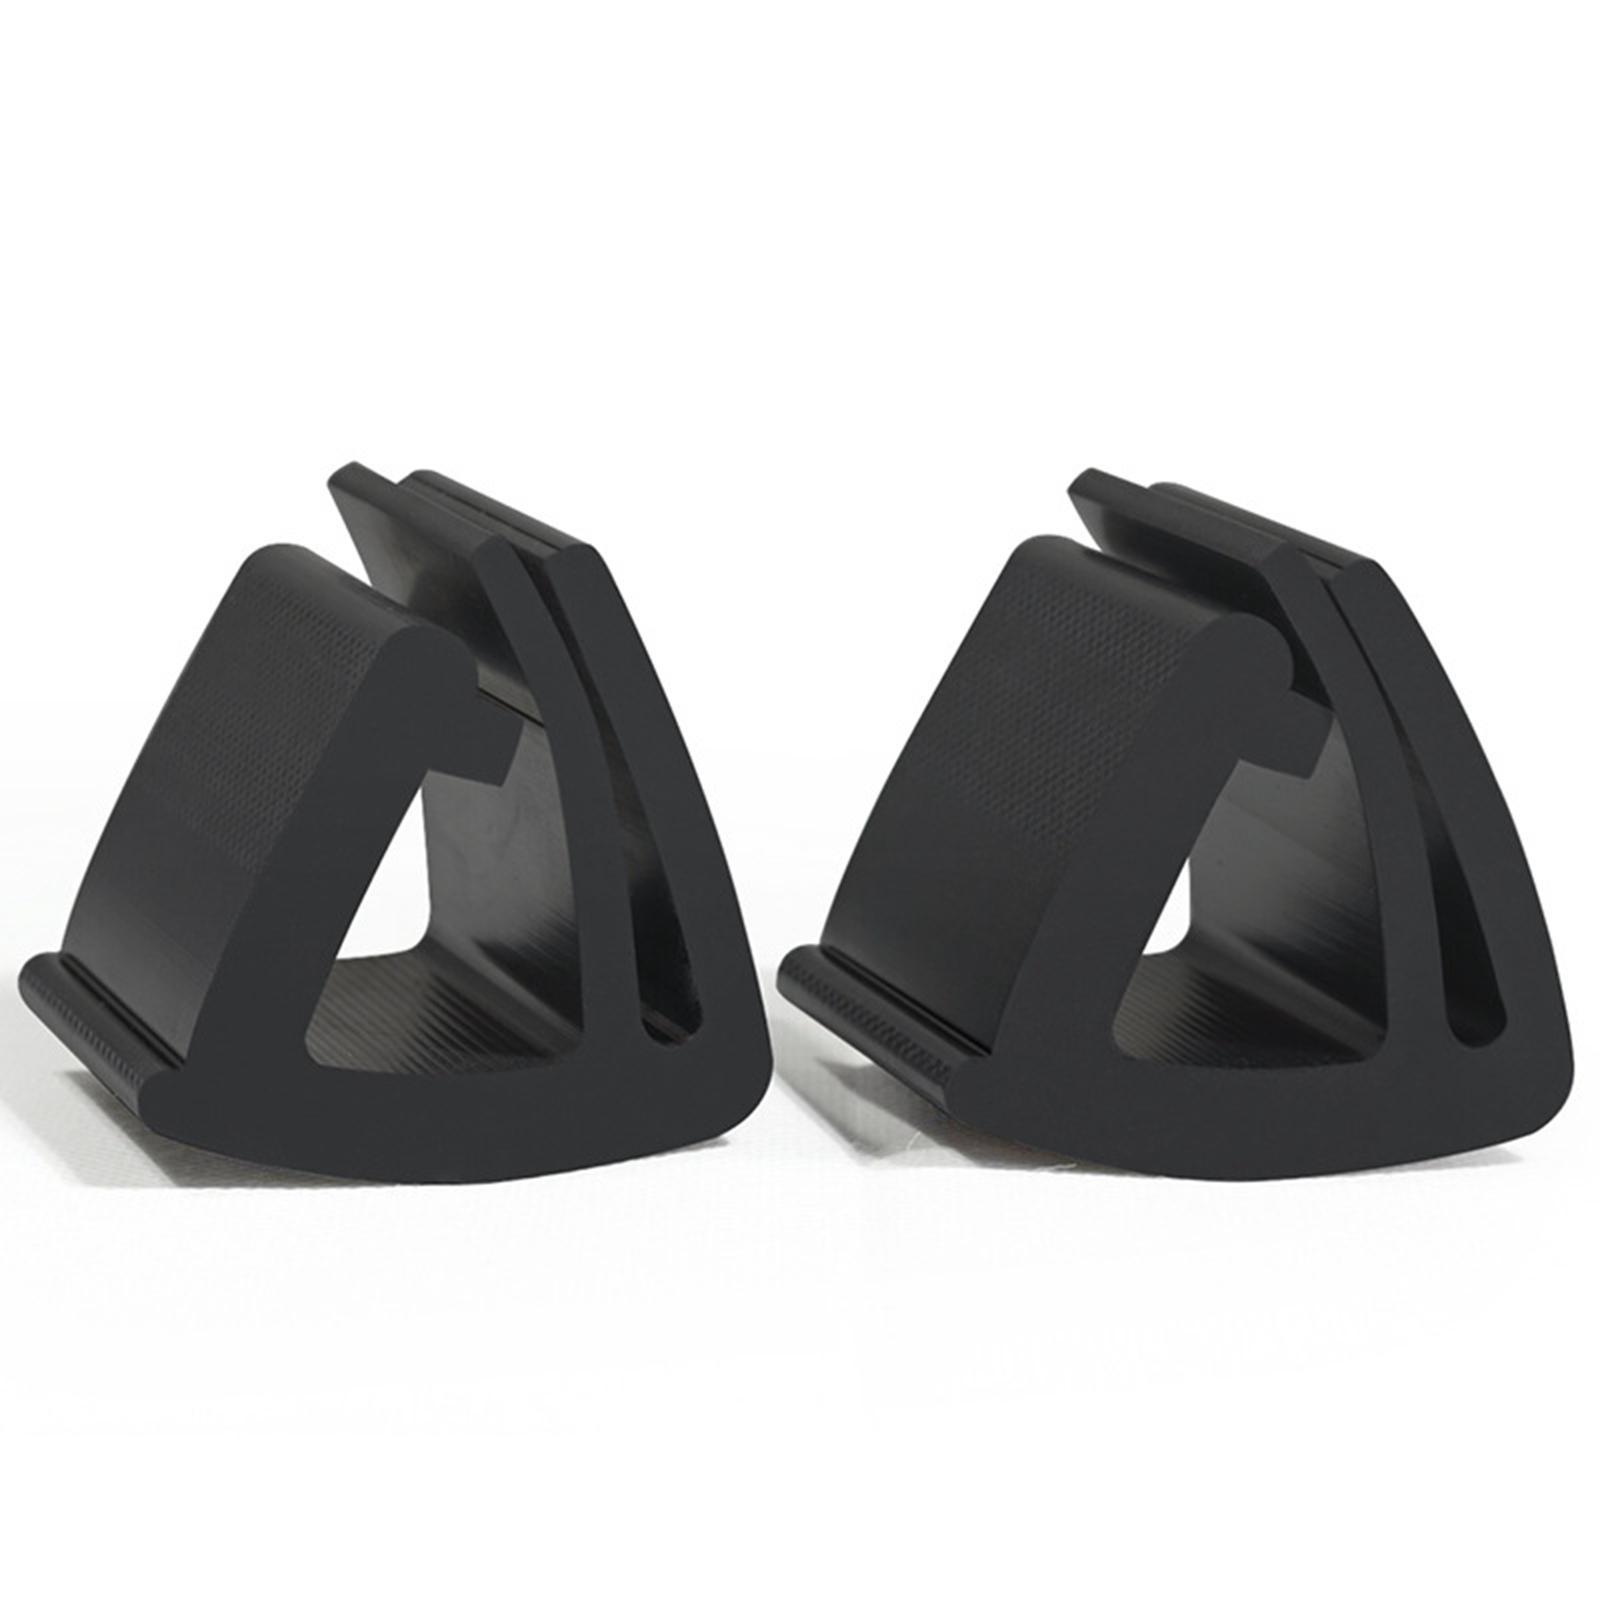 Windshield Retaining Clips Front Top Roof Support For Golf Carts